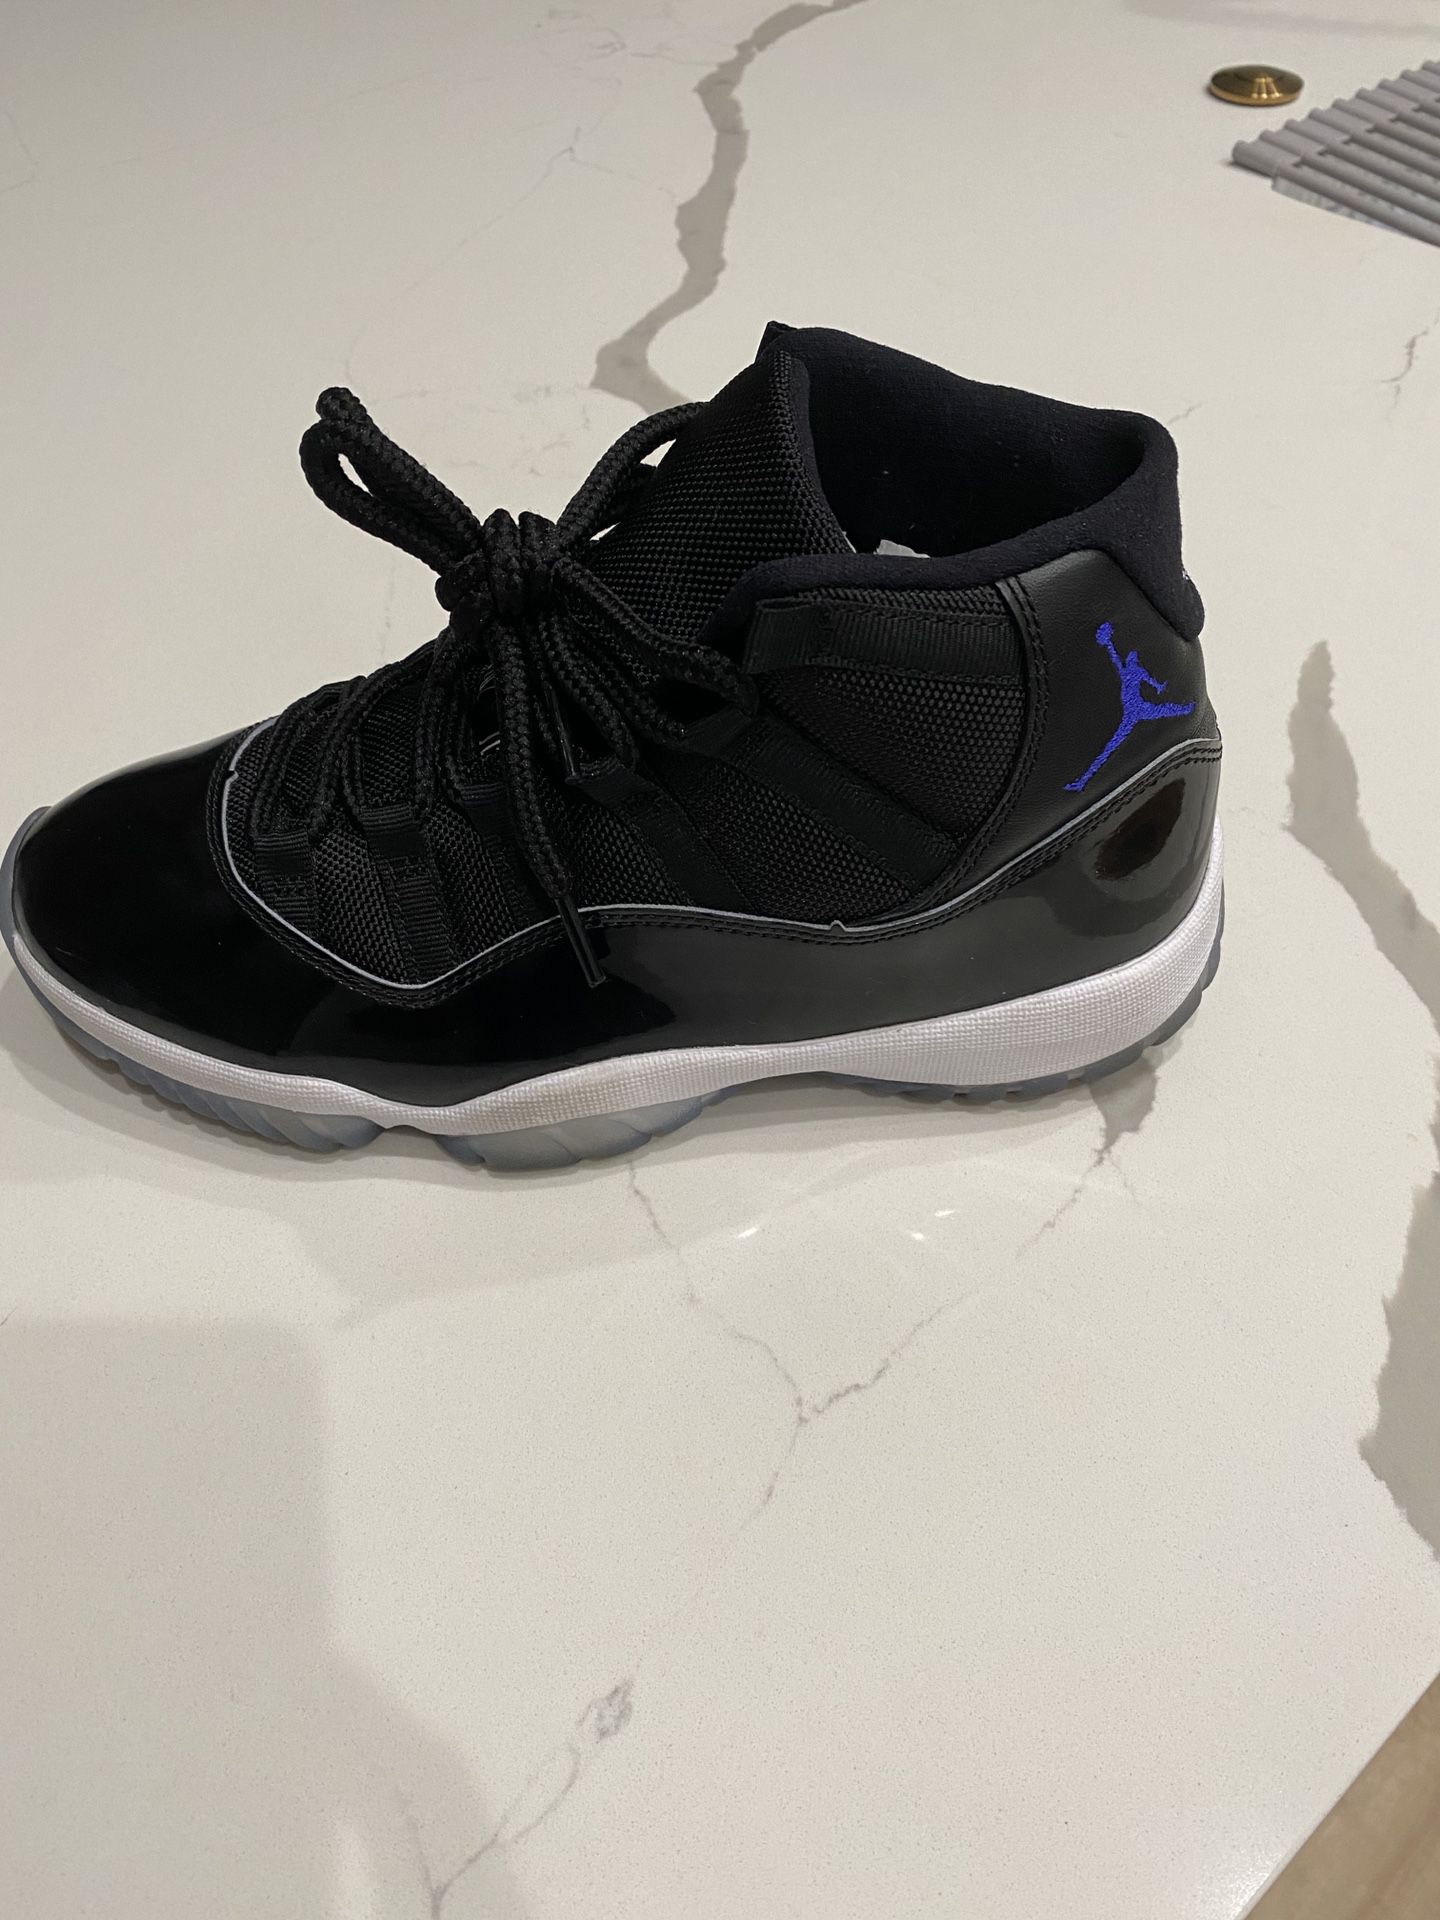 Space Jam 11s 2016 Size 7.5